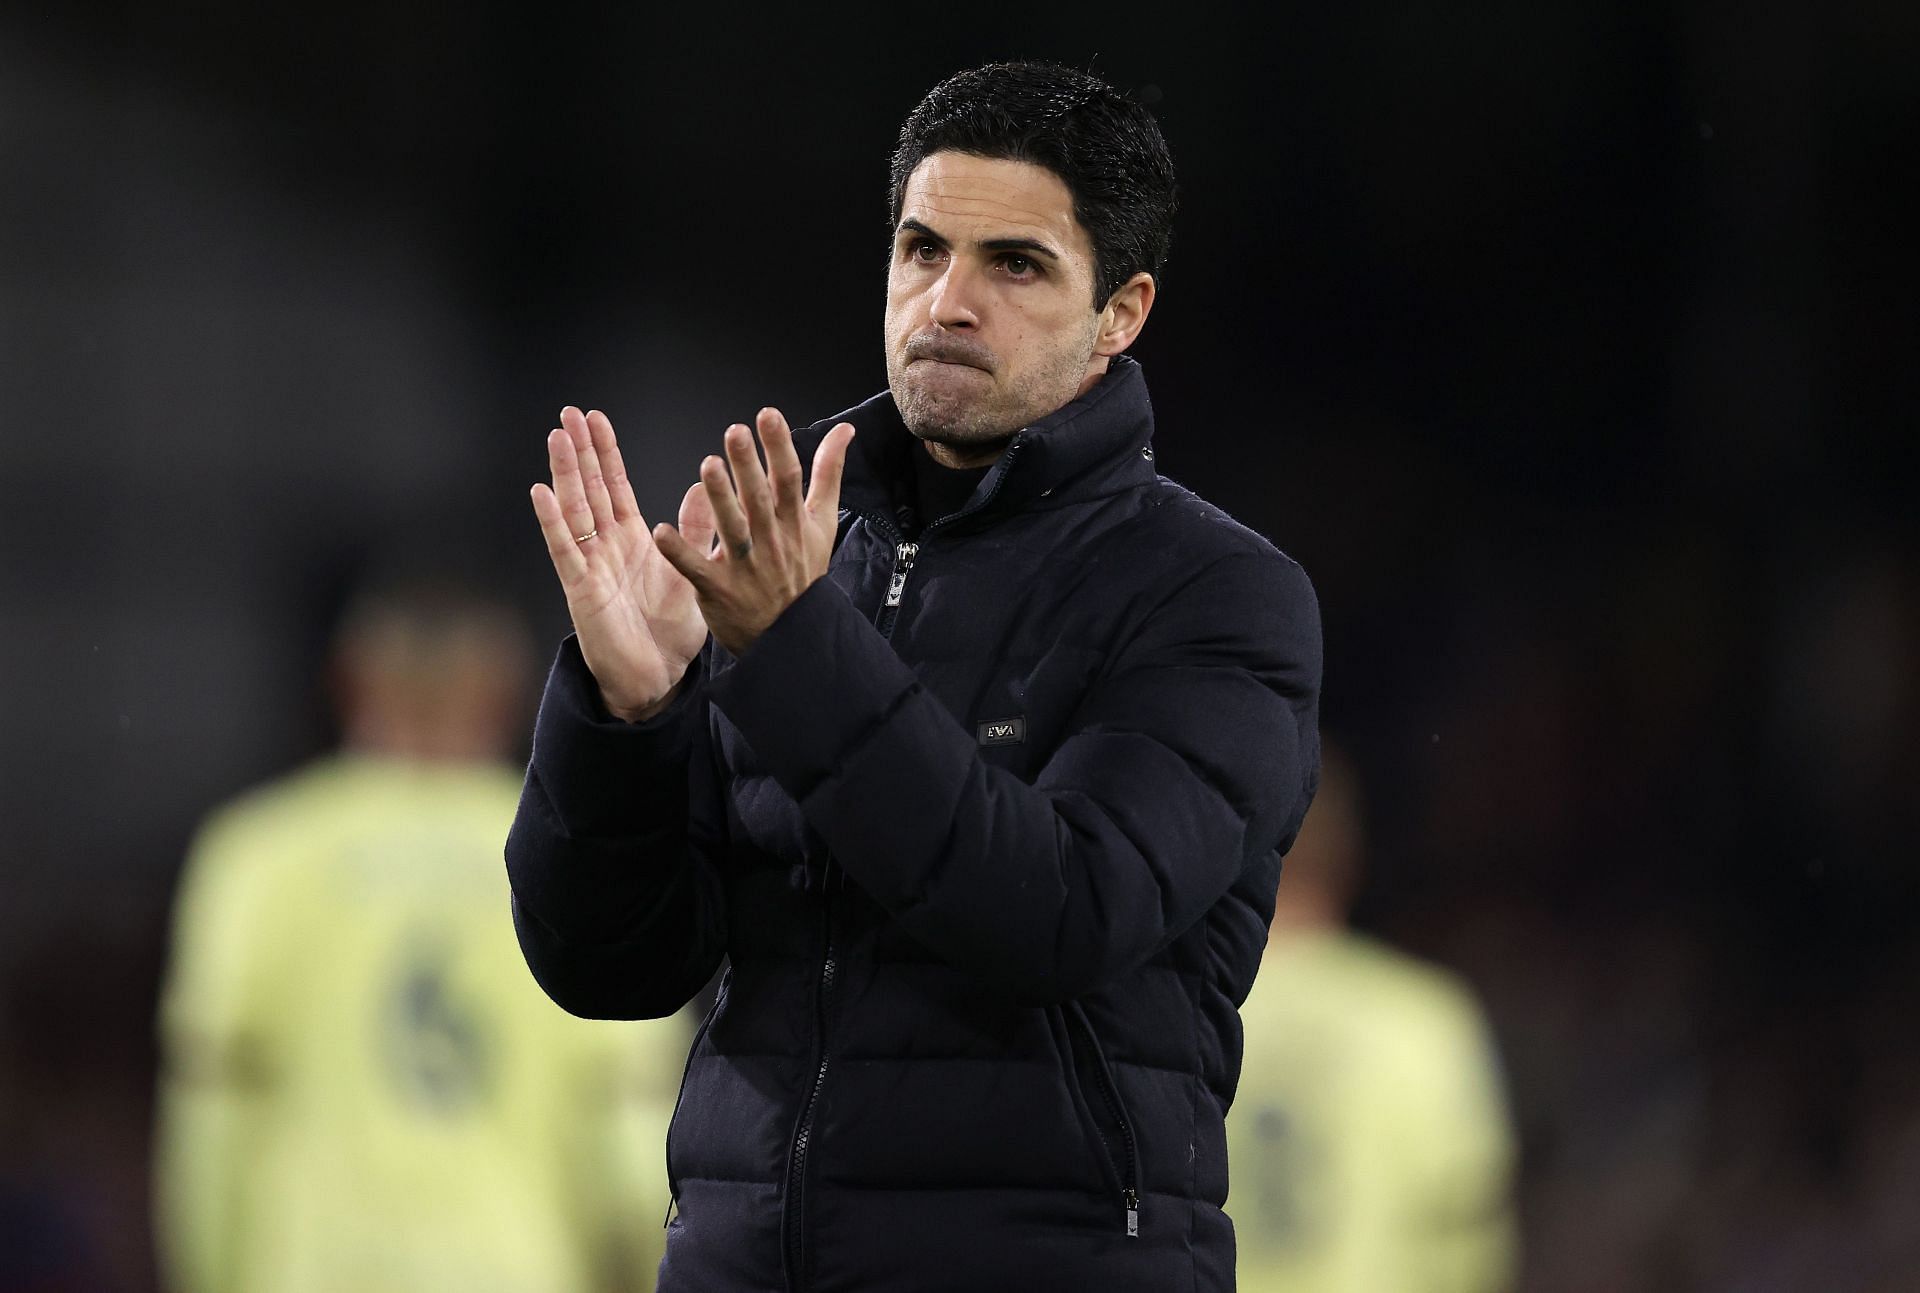 Arsenal manager Mikel Arteta is working to improve his team